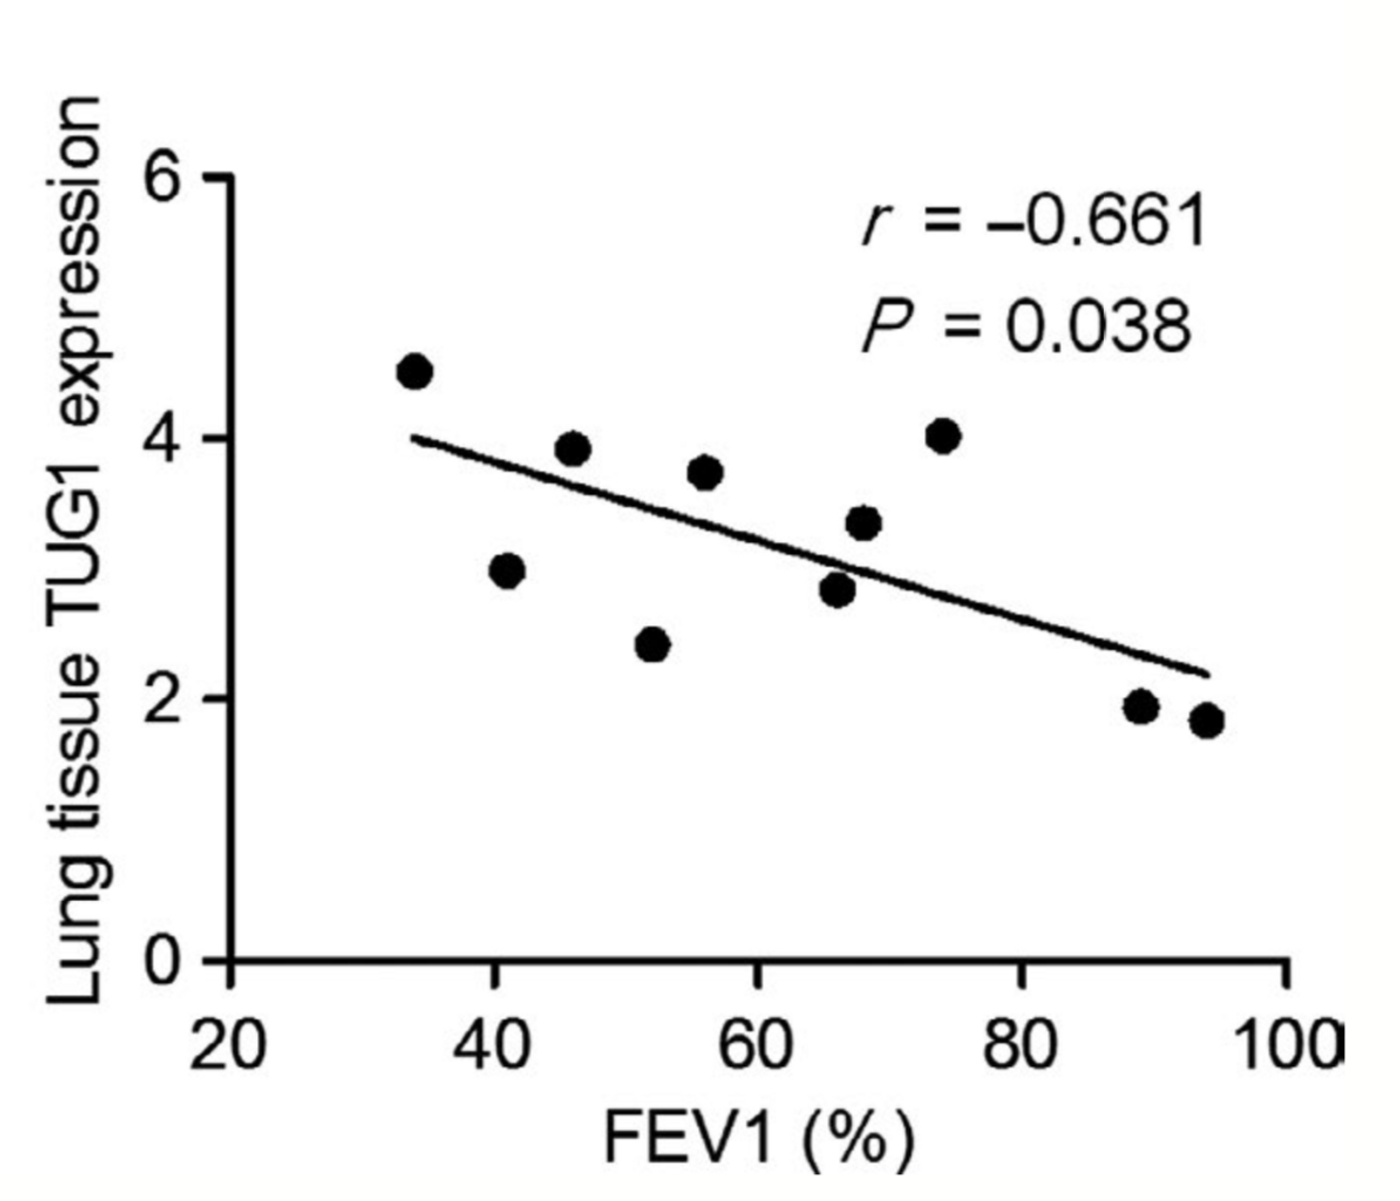 Higher TUG1 expression is seen to be correlated with a lower FEV1 value, indicating TUG1 higher expression associated with a common determiner of COPD